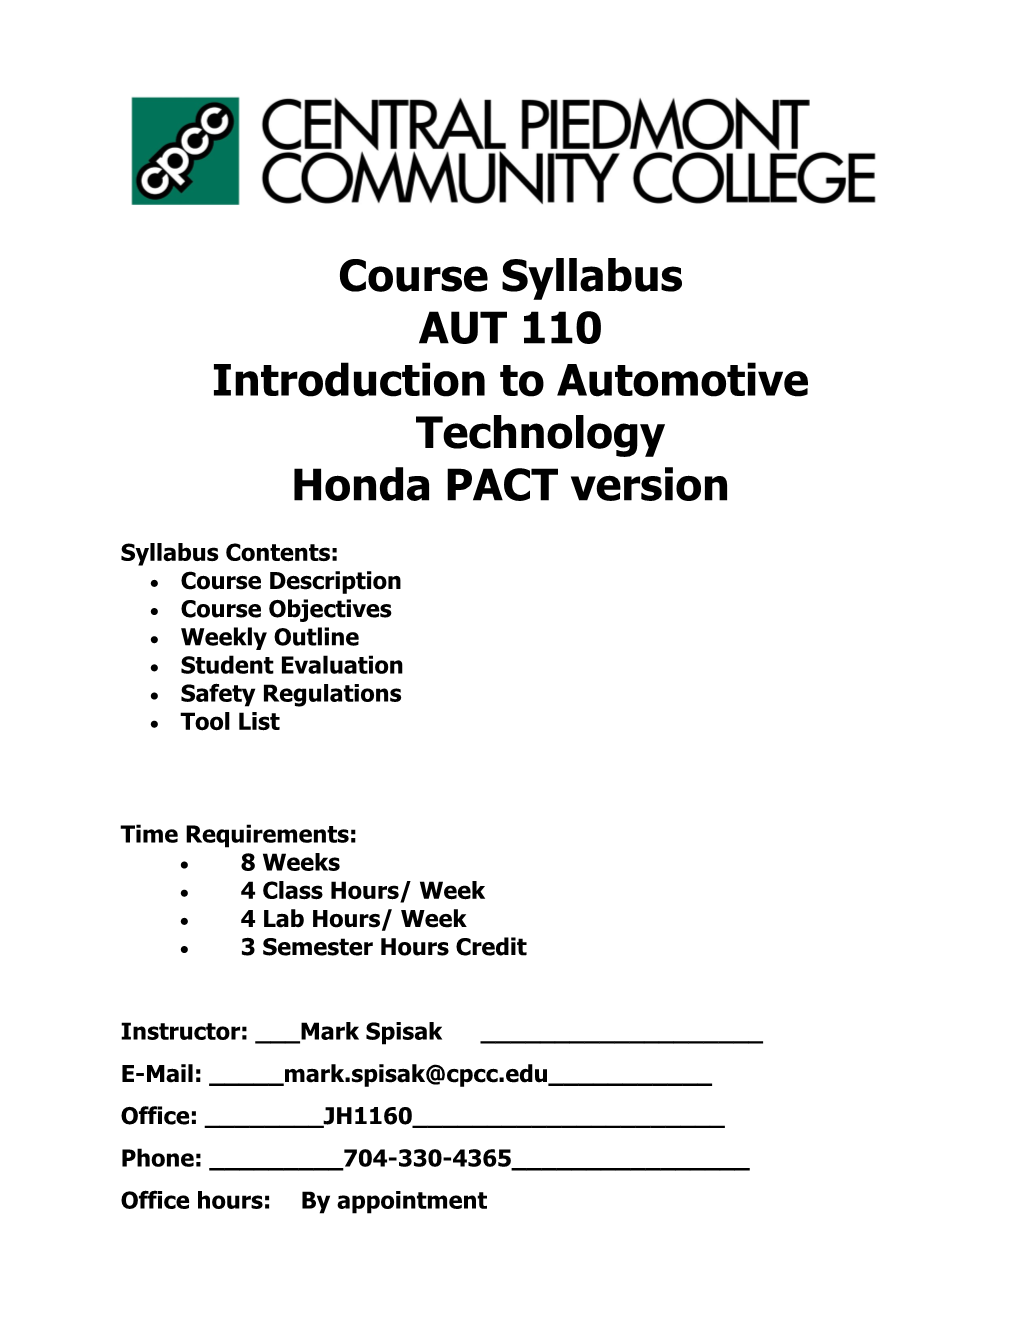 Introduction to Automotive Technology